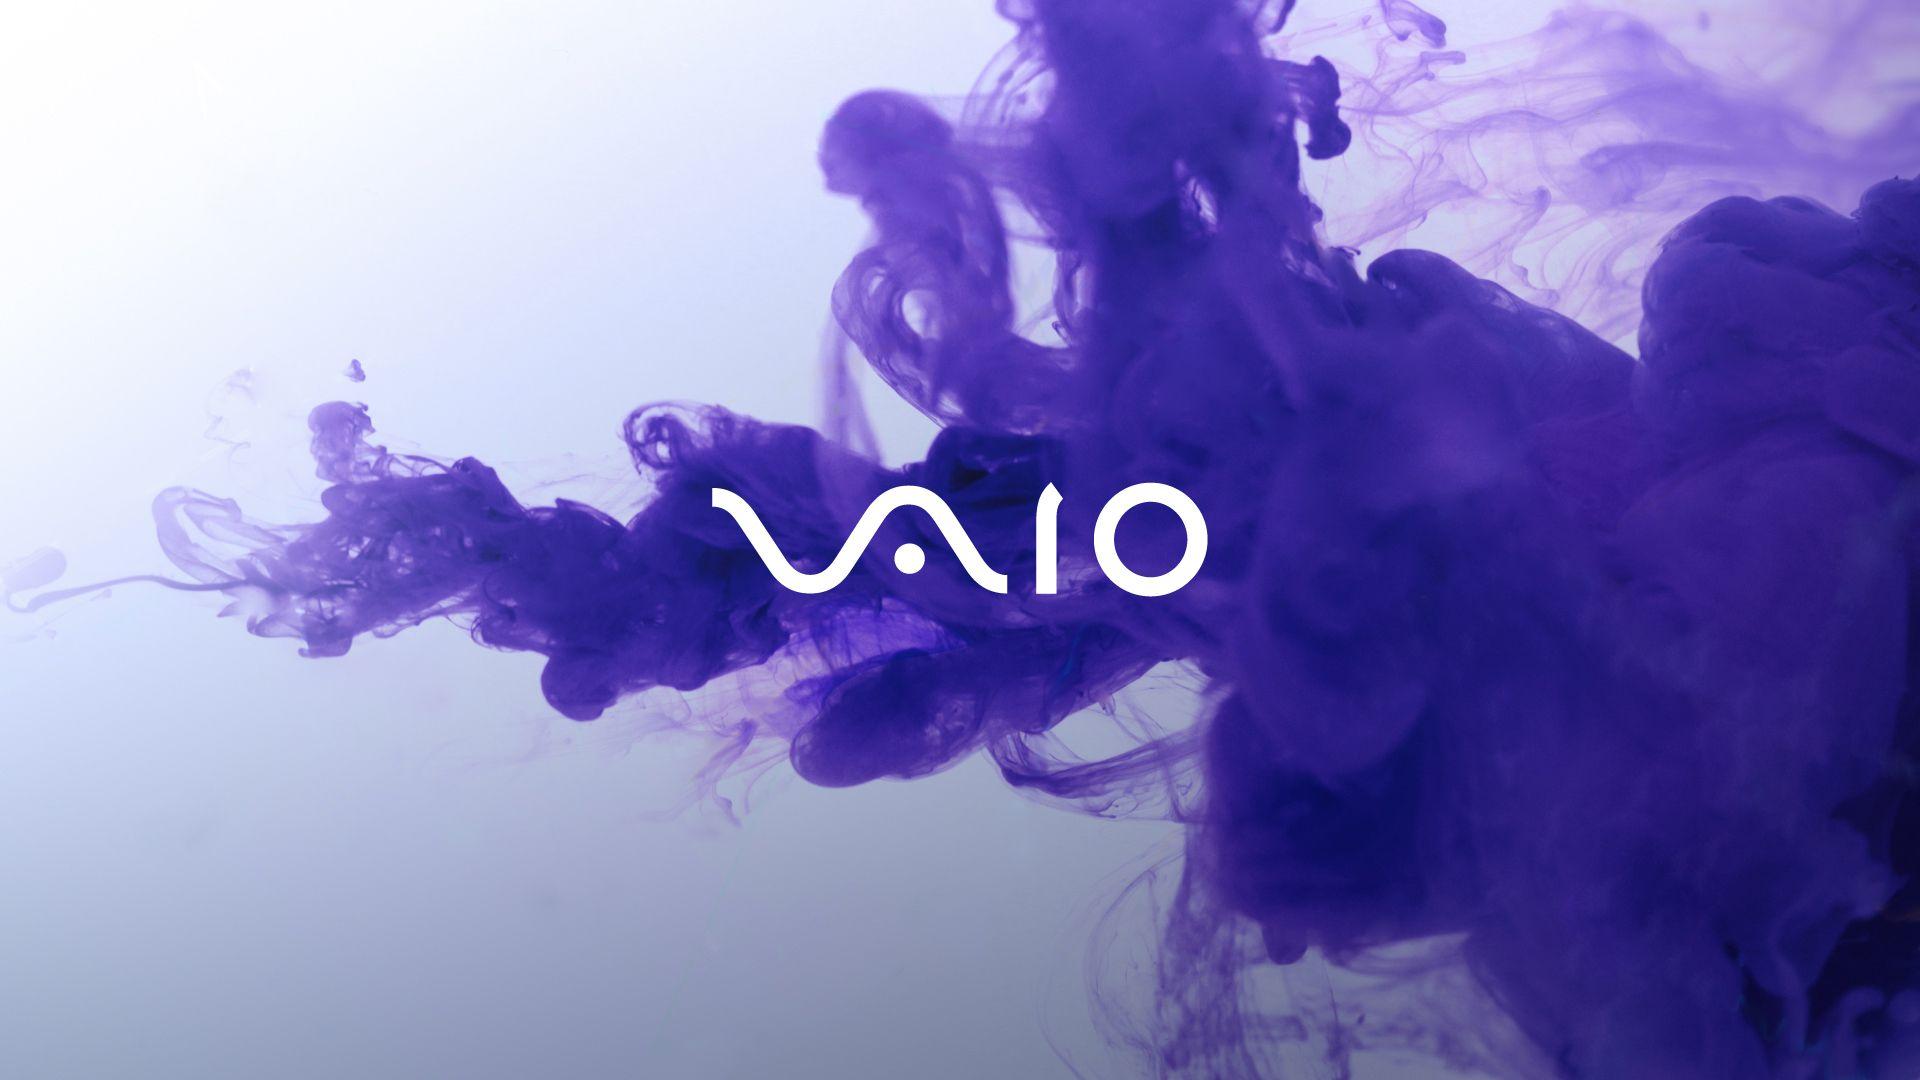 HD Sony Vaio Wallpaper & Vaio Background For Free Download